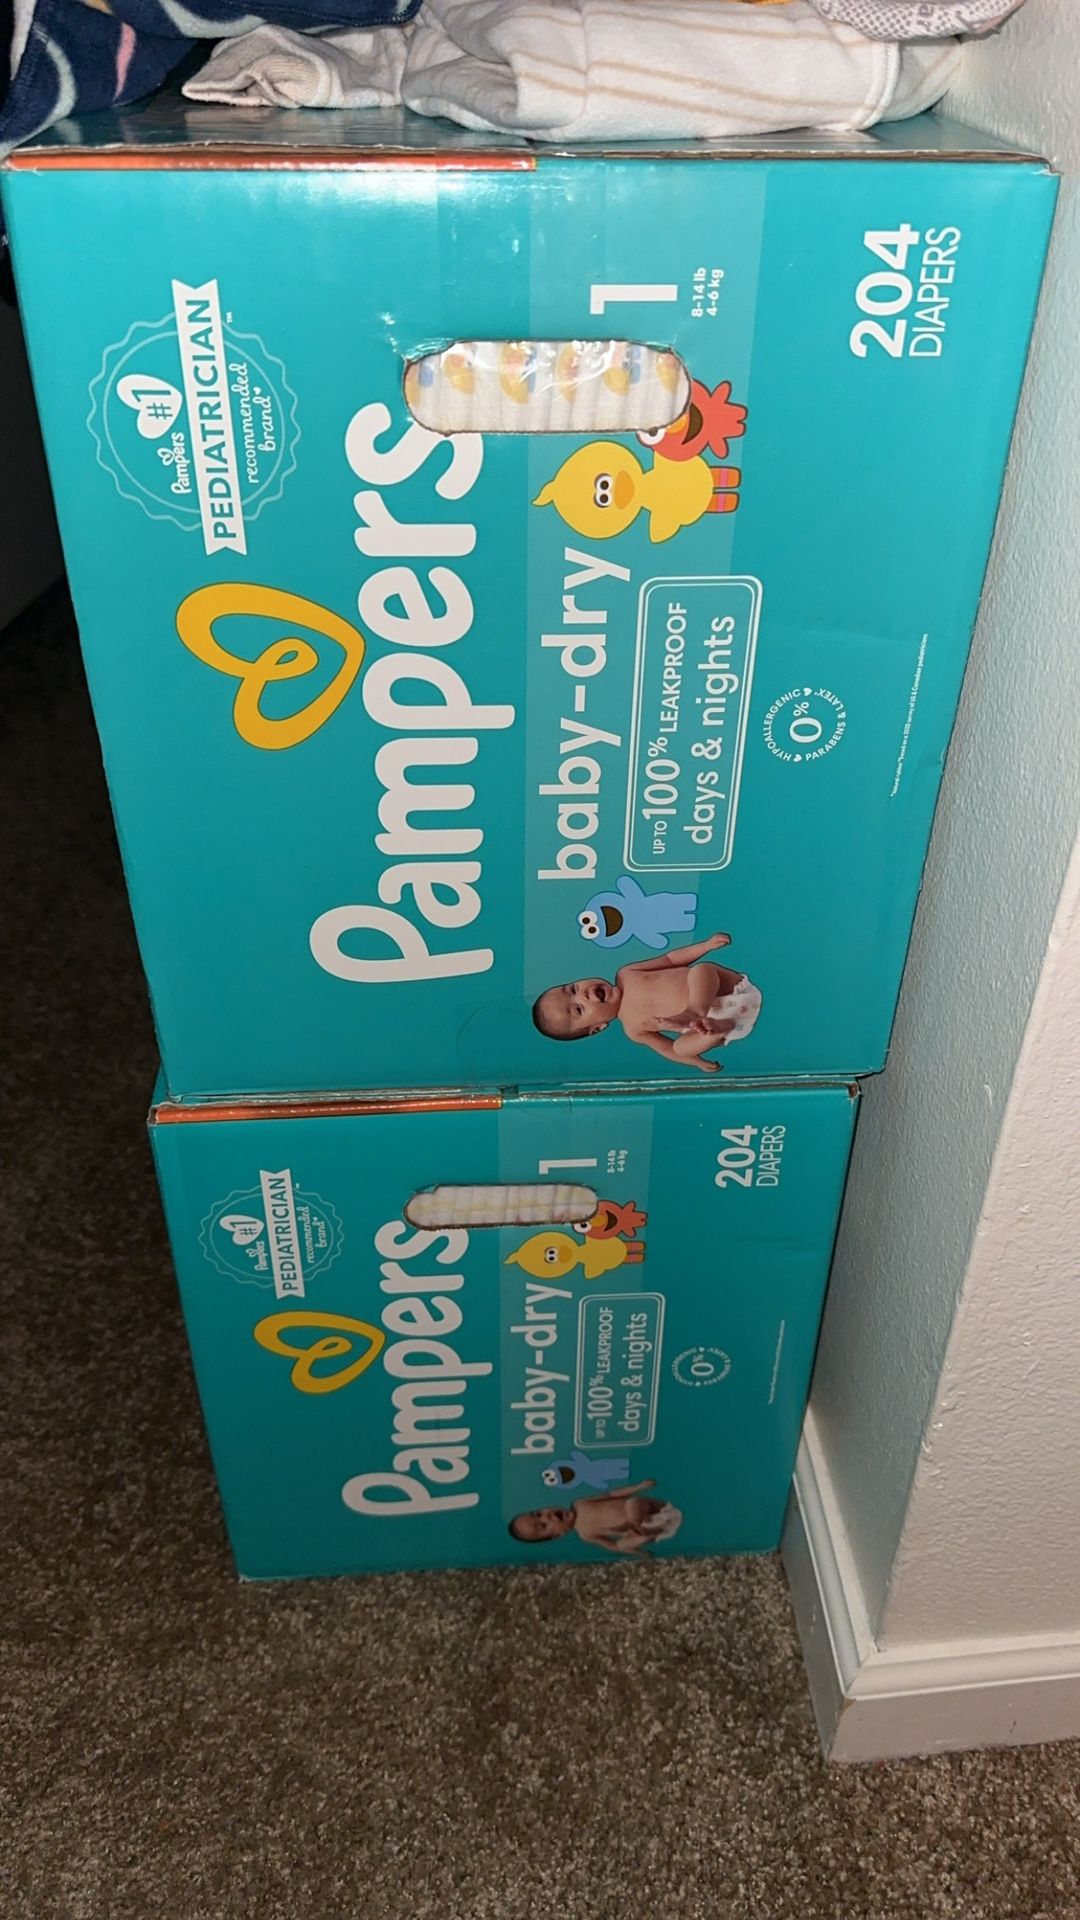 Size 1 Pampers diapers 